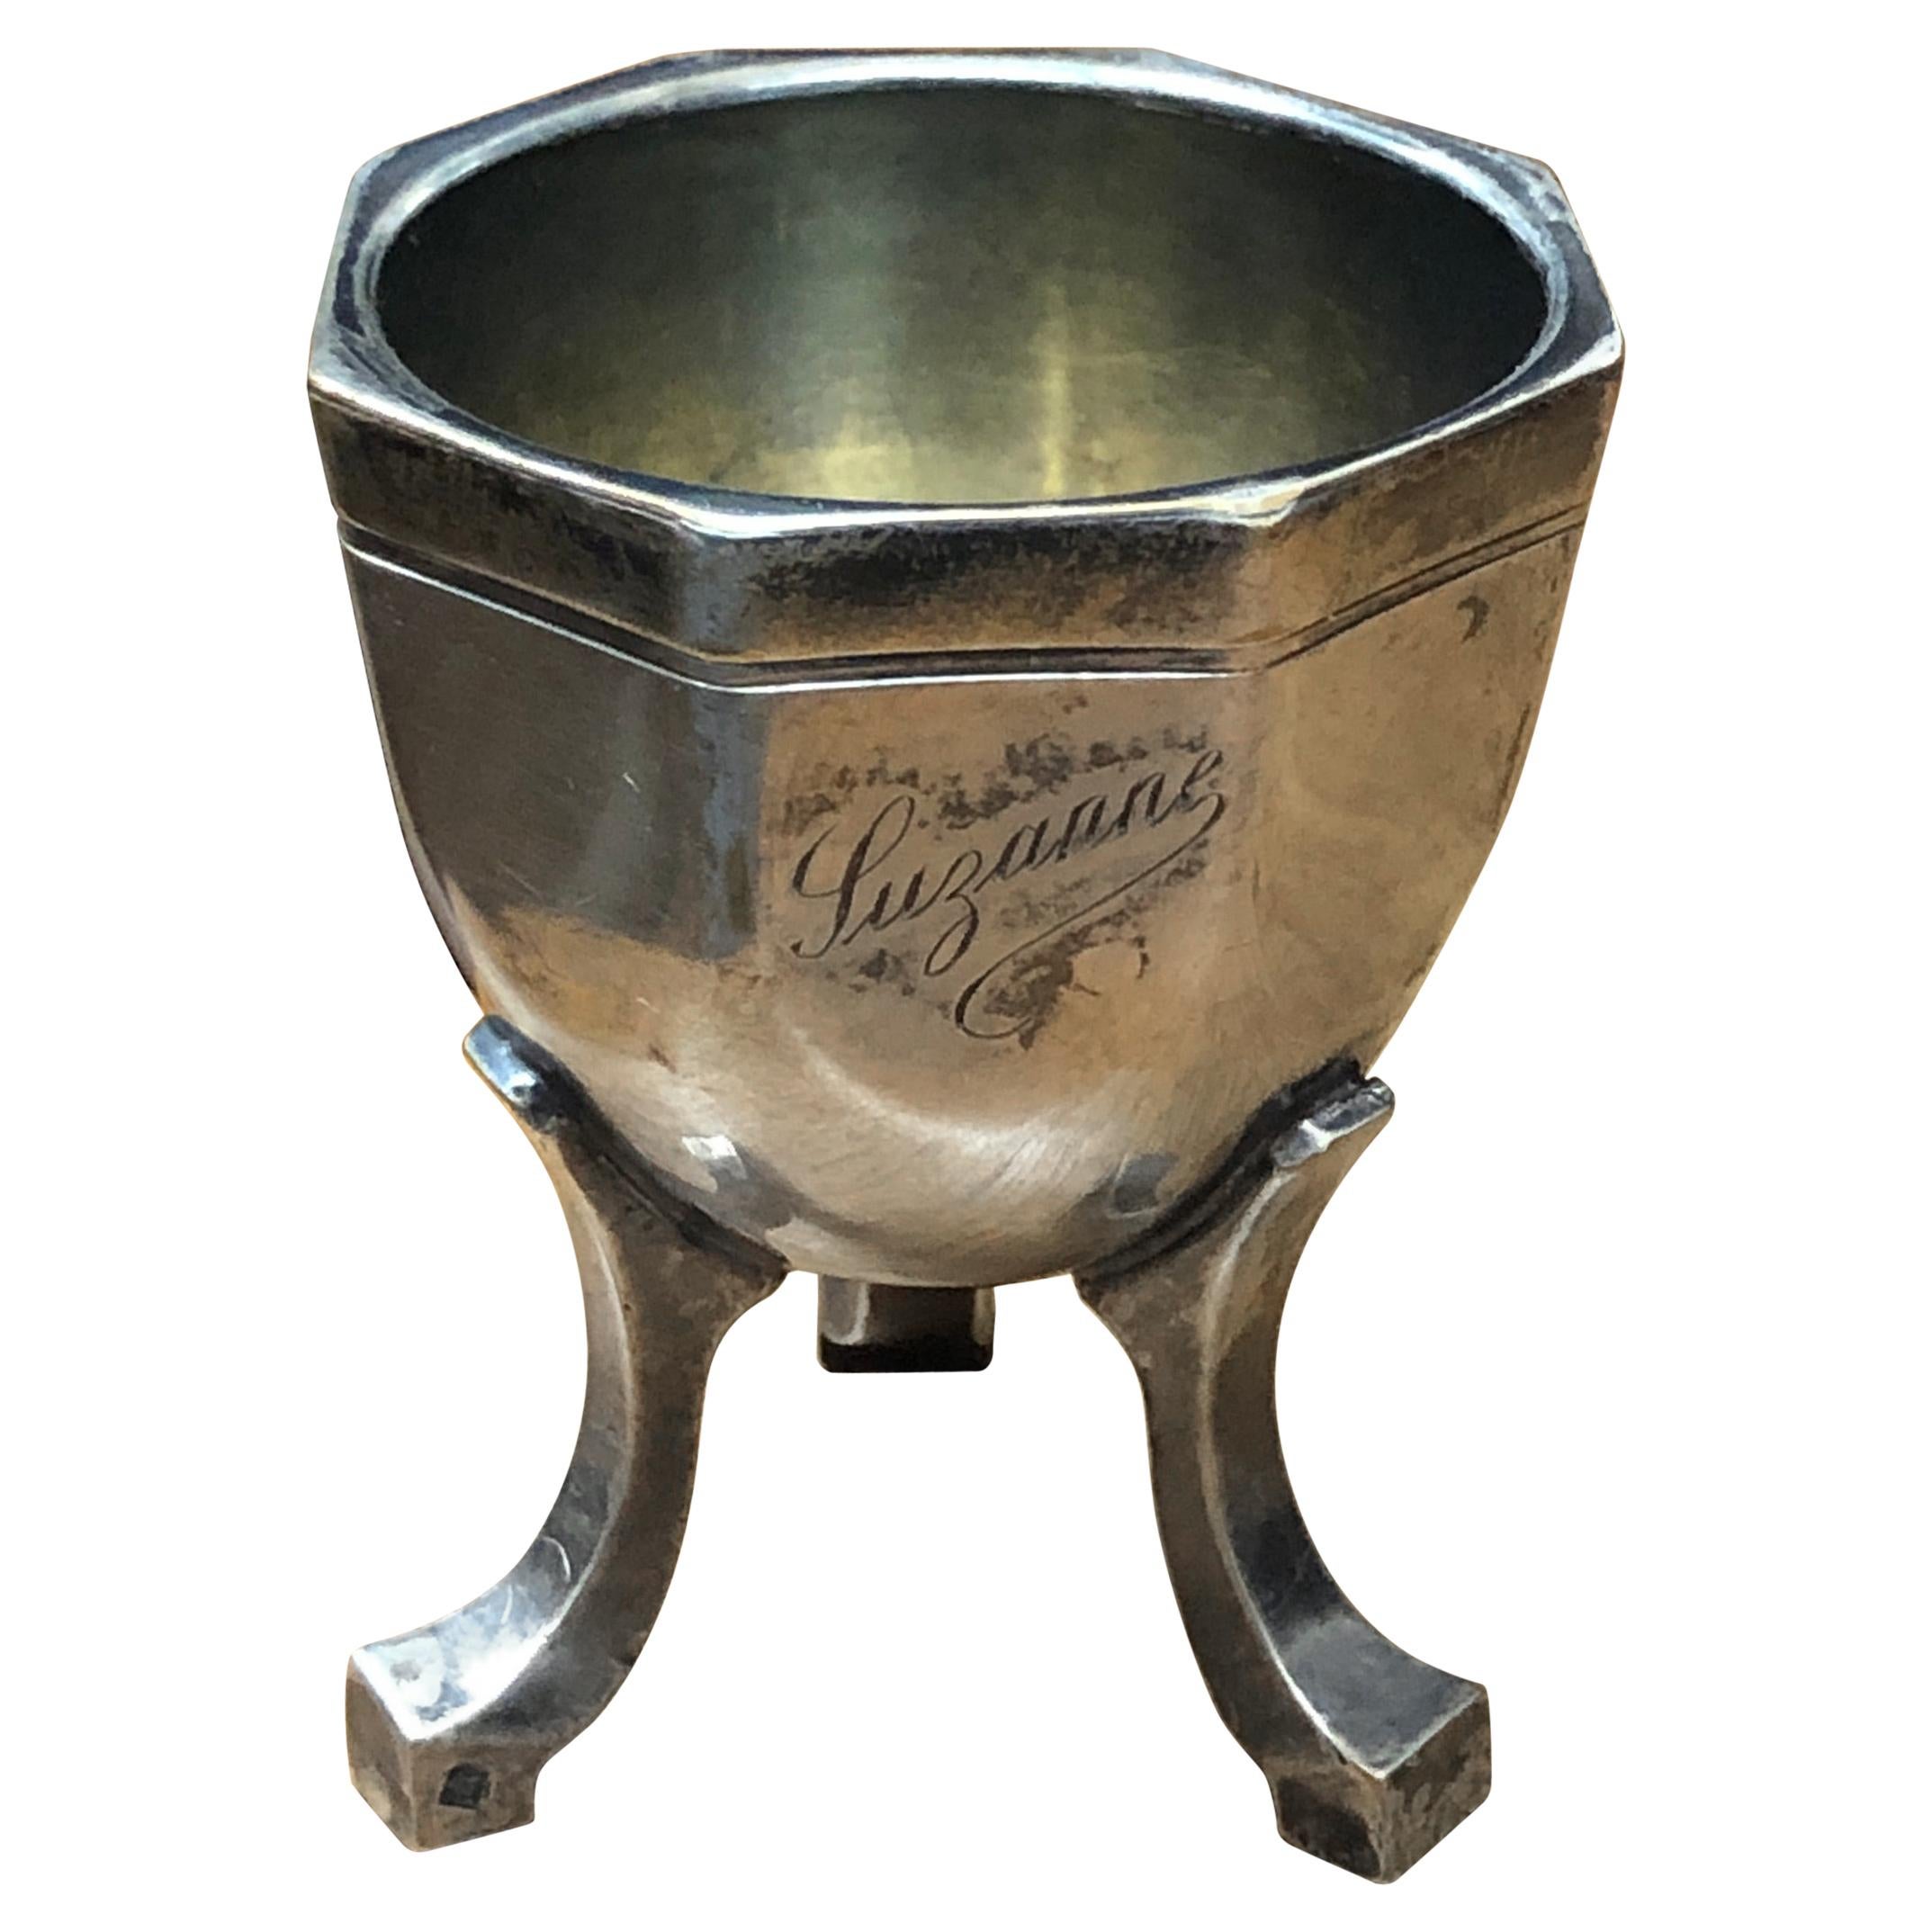 19th Century French Tripod Silver Egg Cup Marked "Suzanne" For Sale